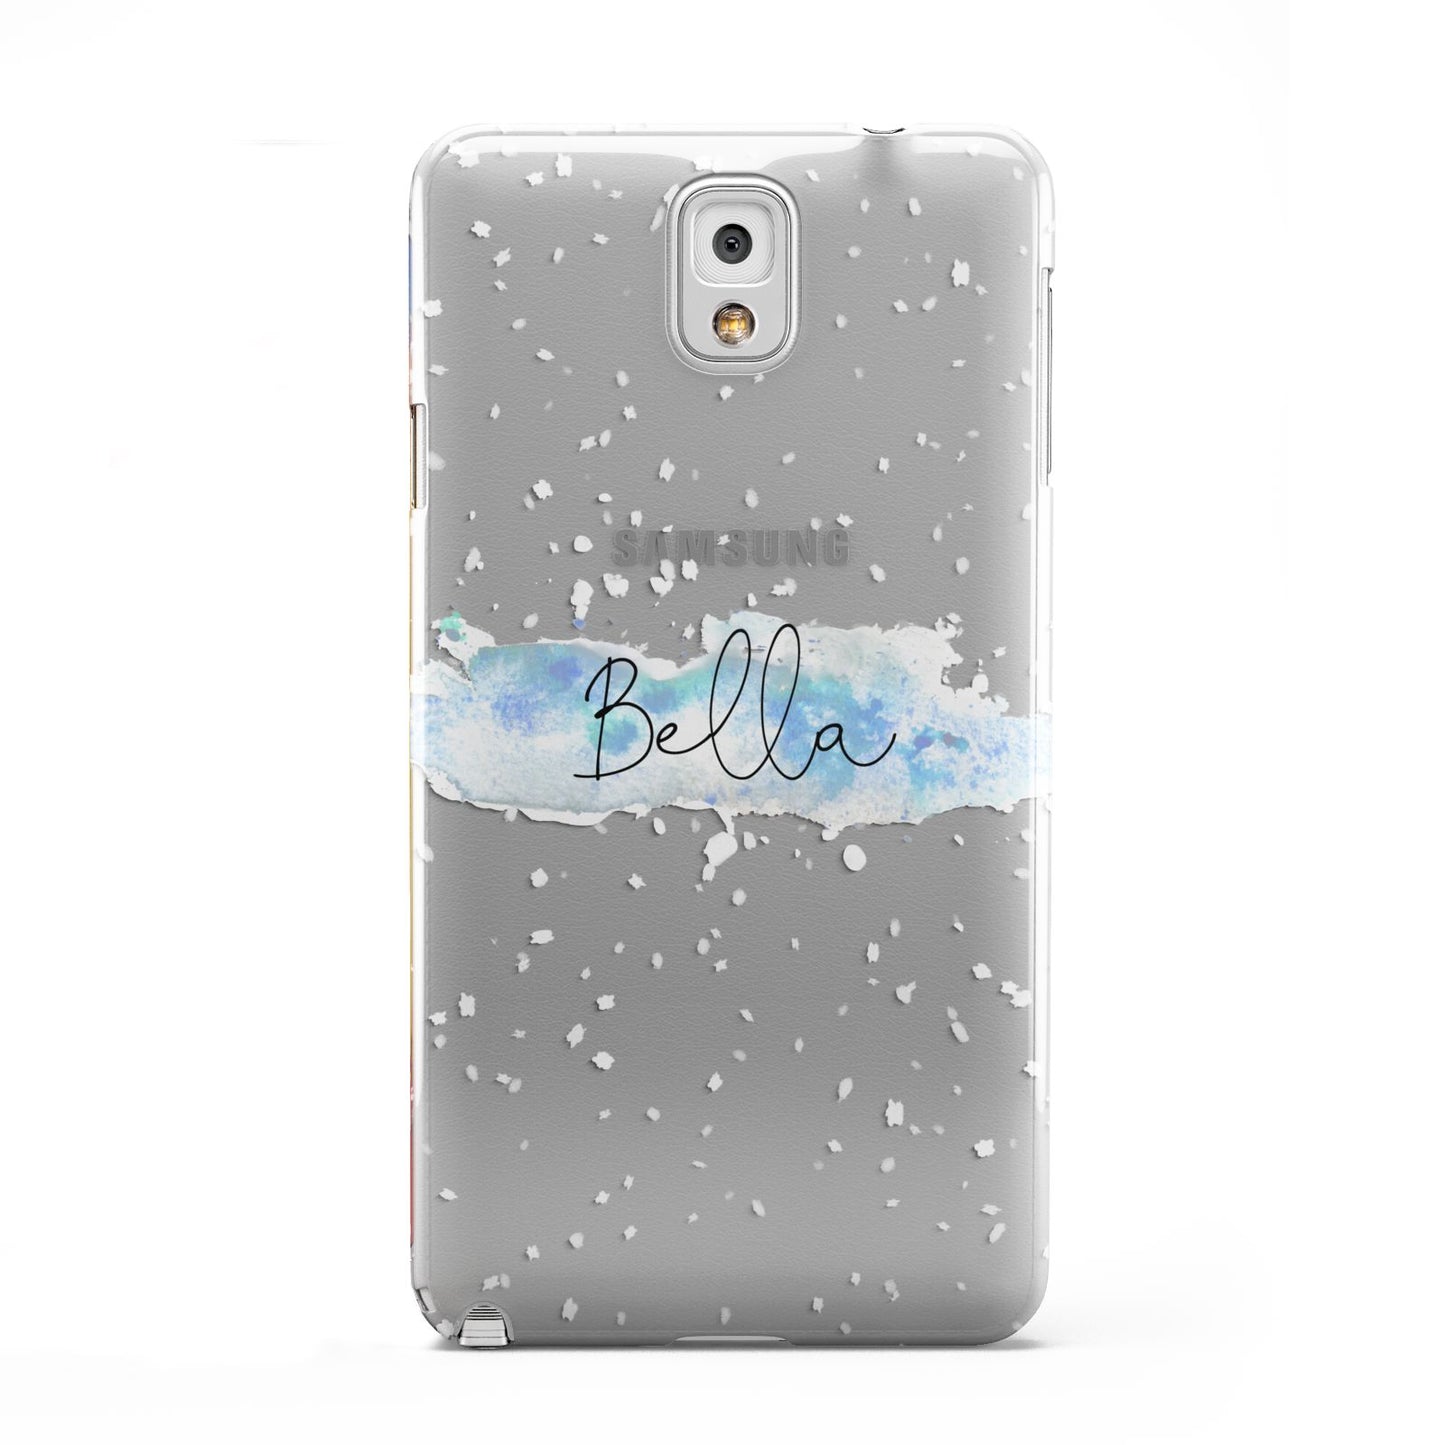 Personalised Christmas Snow fall Samsung Galaxy Note 3 Case